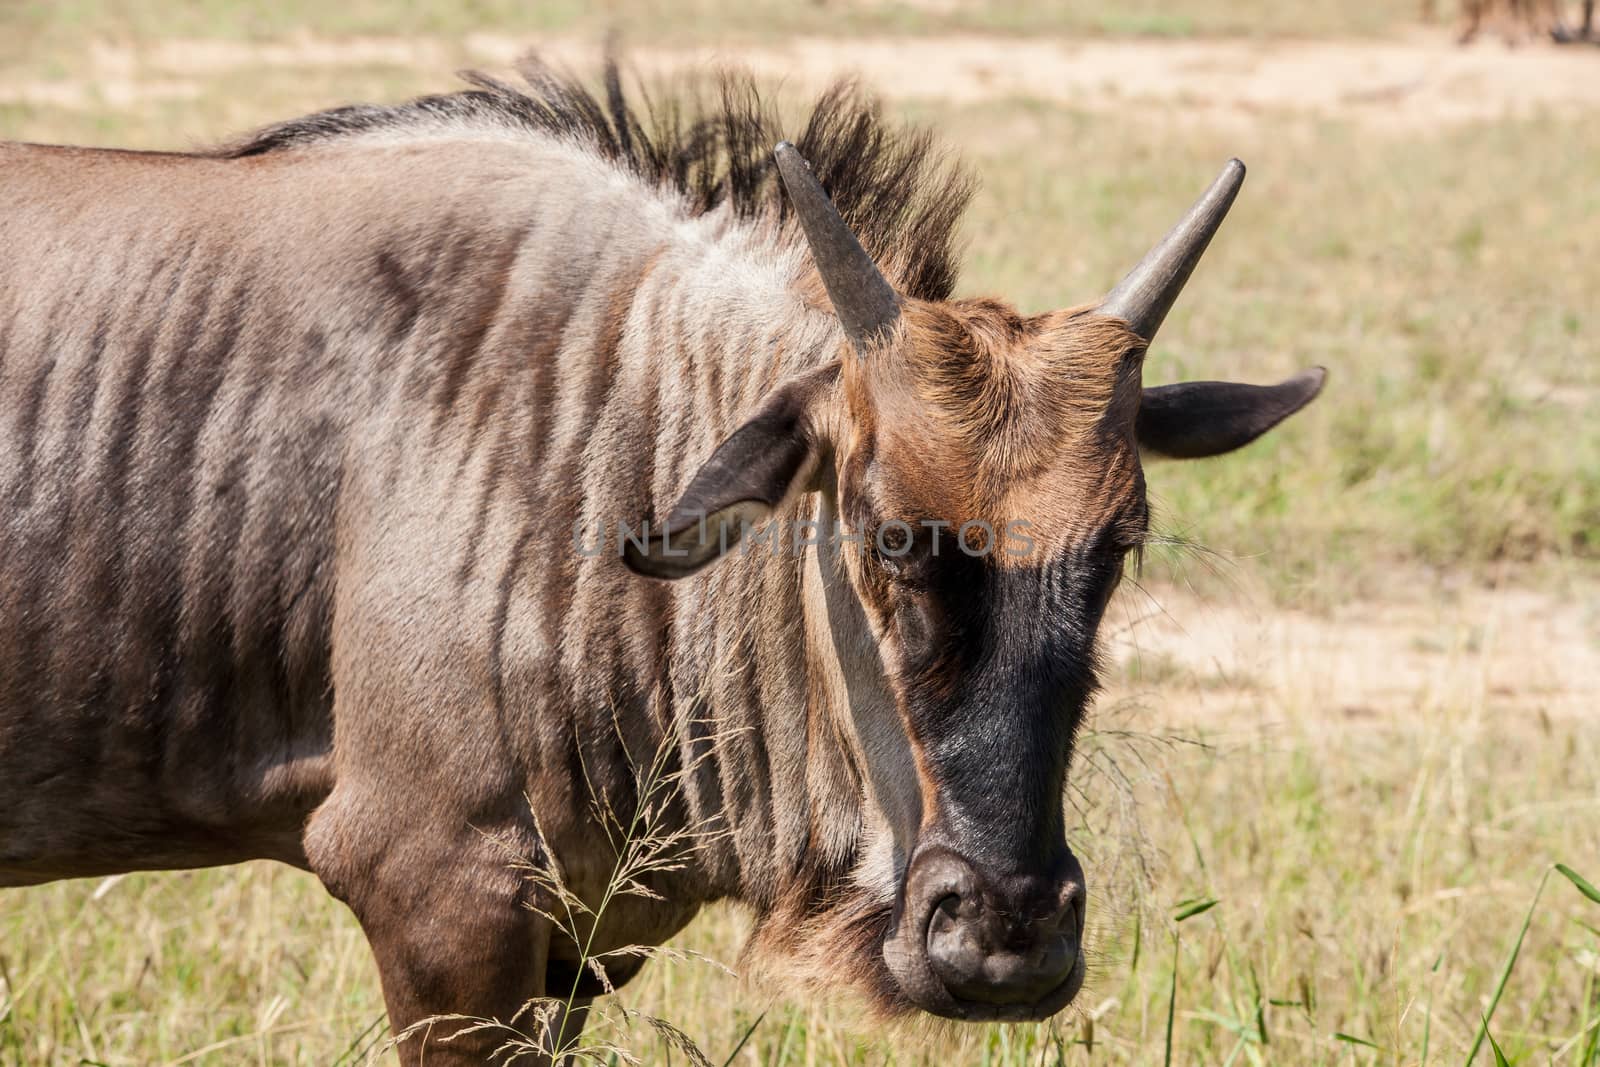 Common or Blue wildebeest (Connochaetes taurinus) photographed in Kruger National Park. South Africa